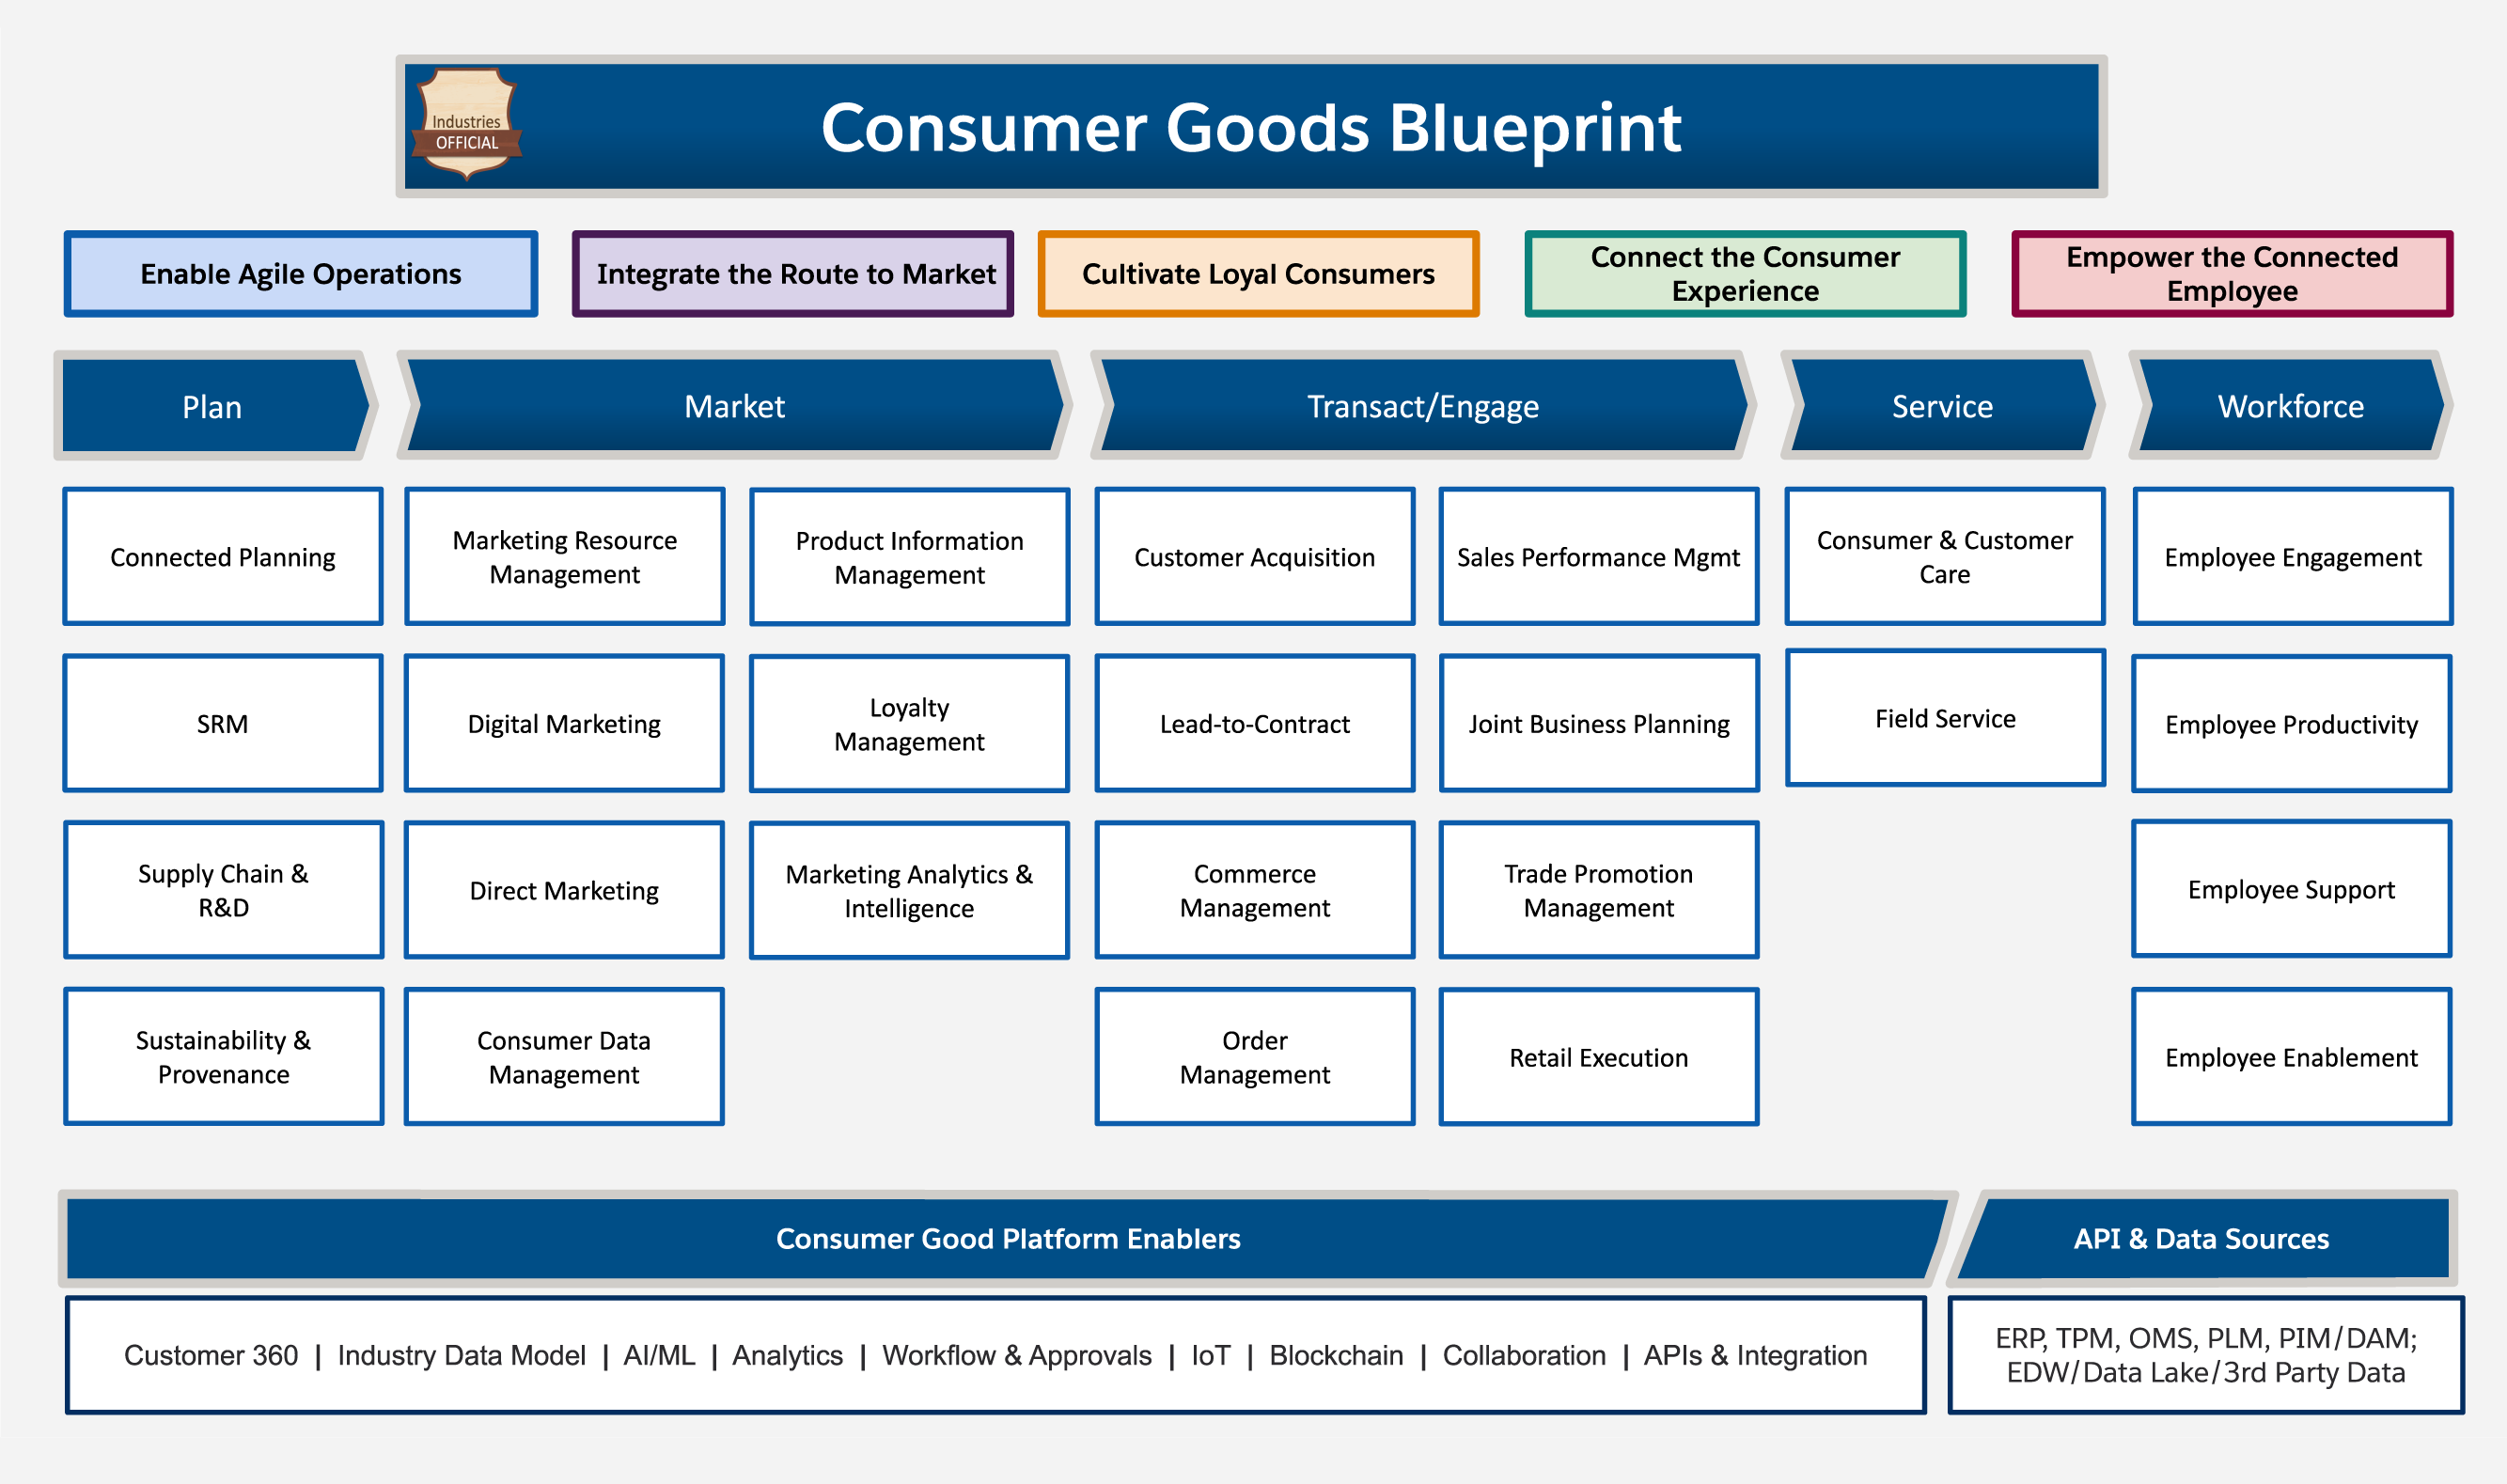 Customer 360 Guide to Consumer Goods